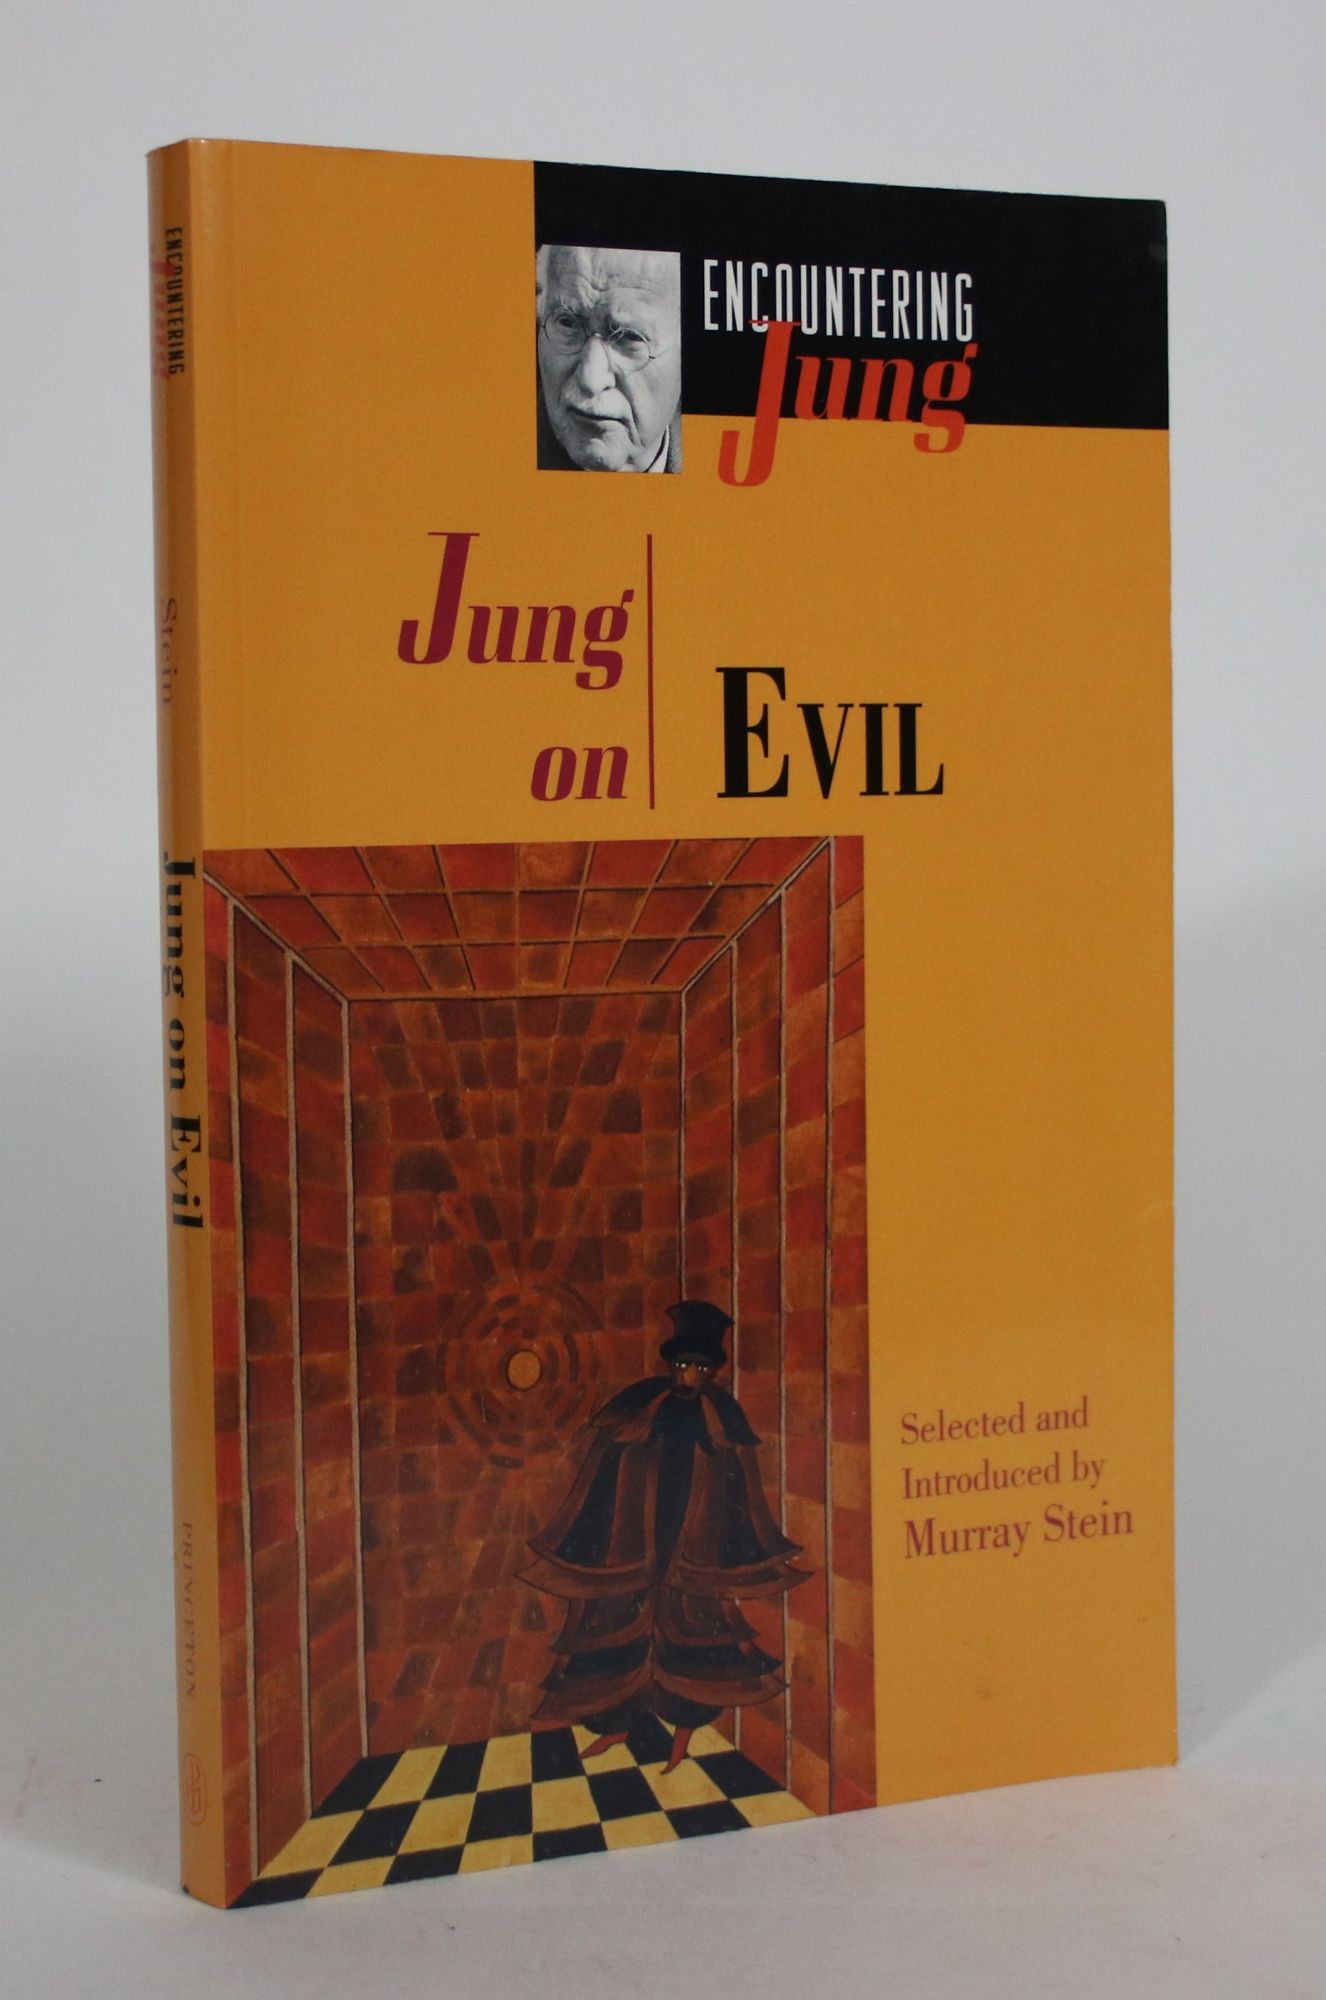 Jung on Evil - Jung, C.G.; Stein, Murray (editor)